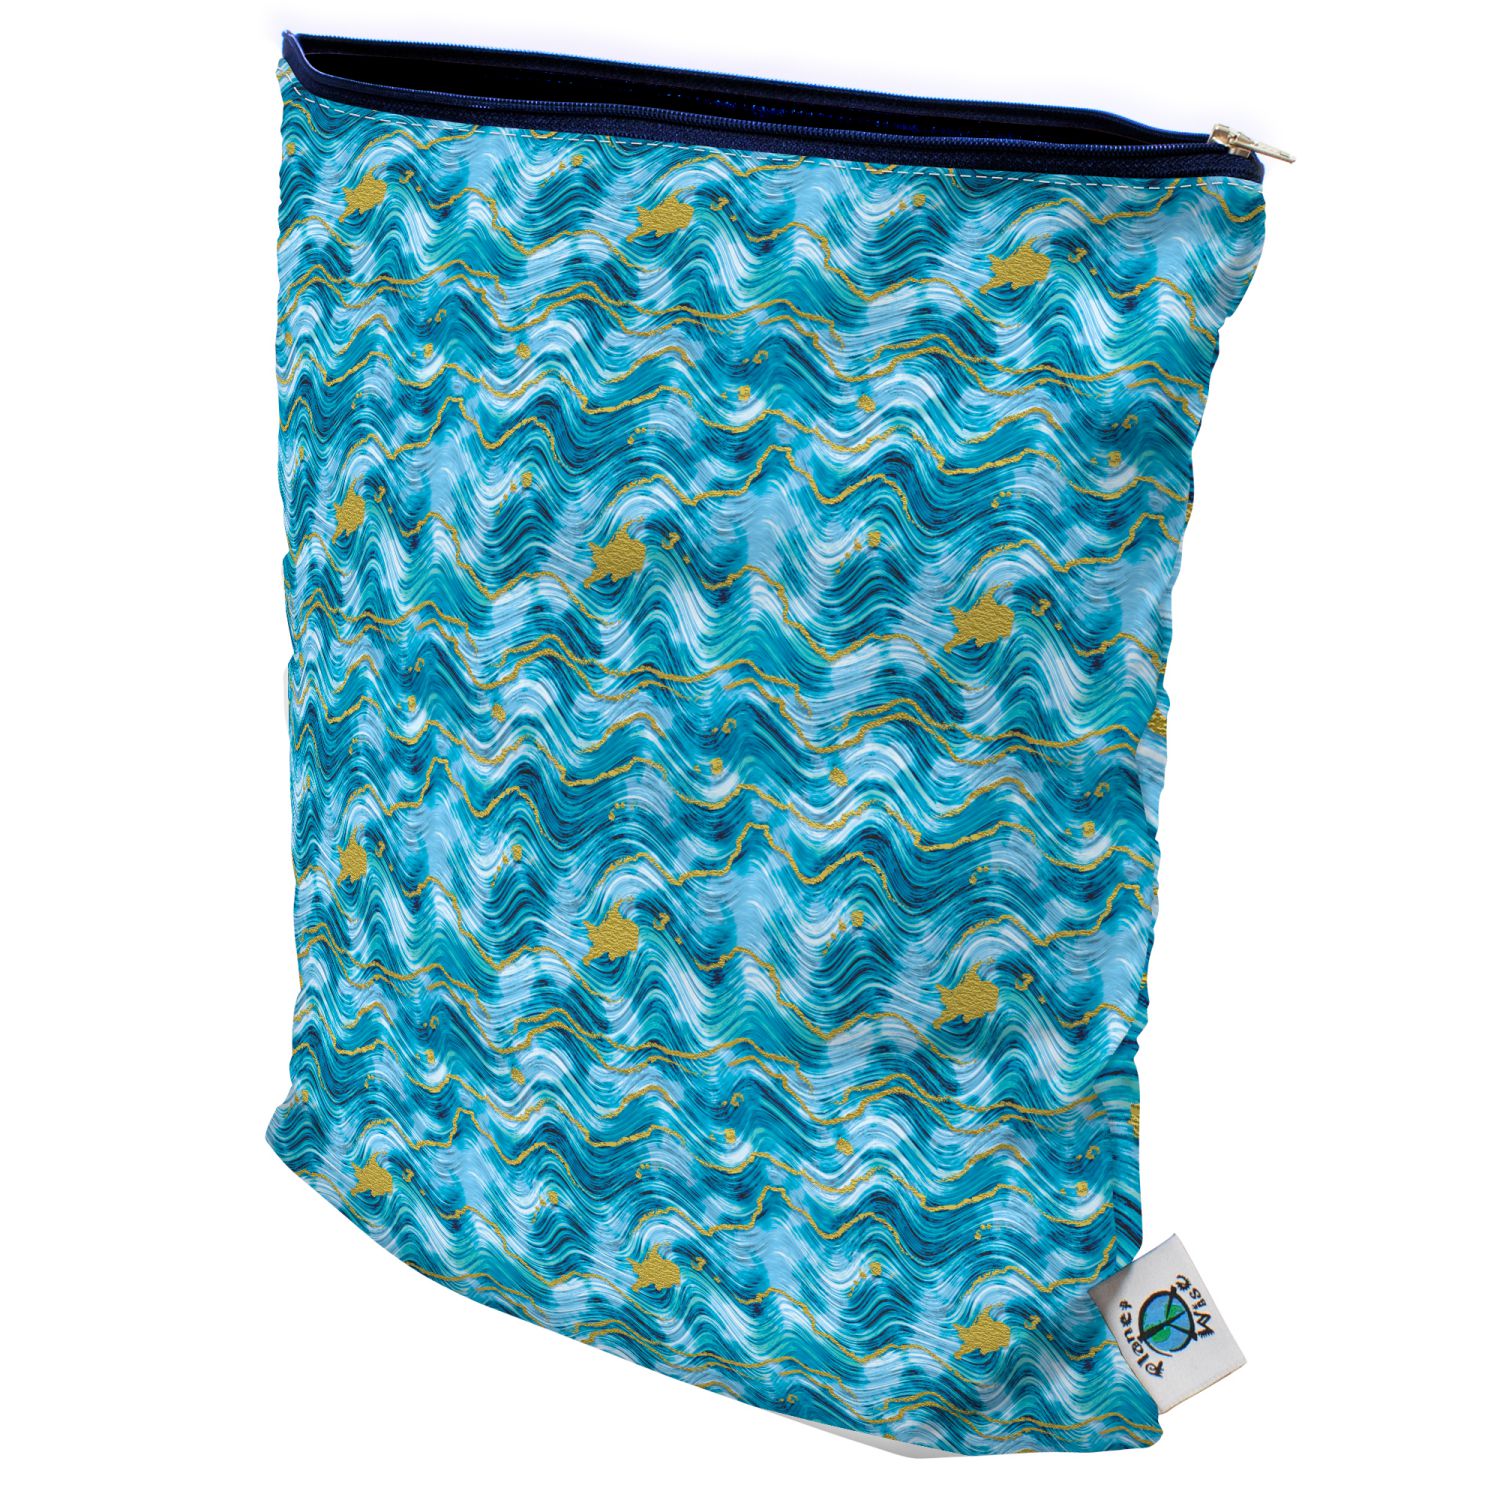 Planet Wise Wetbag (M)